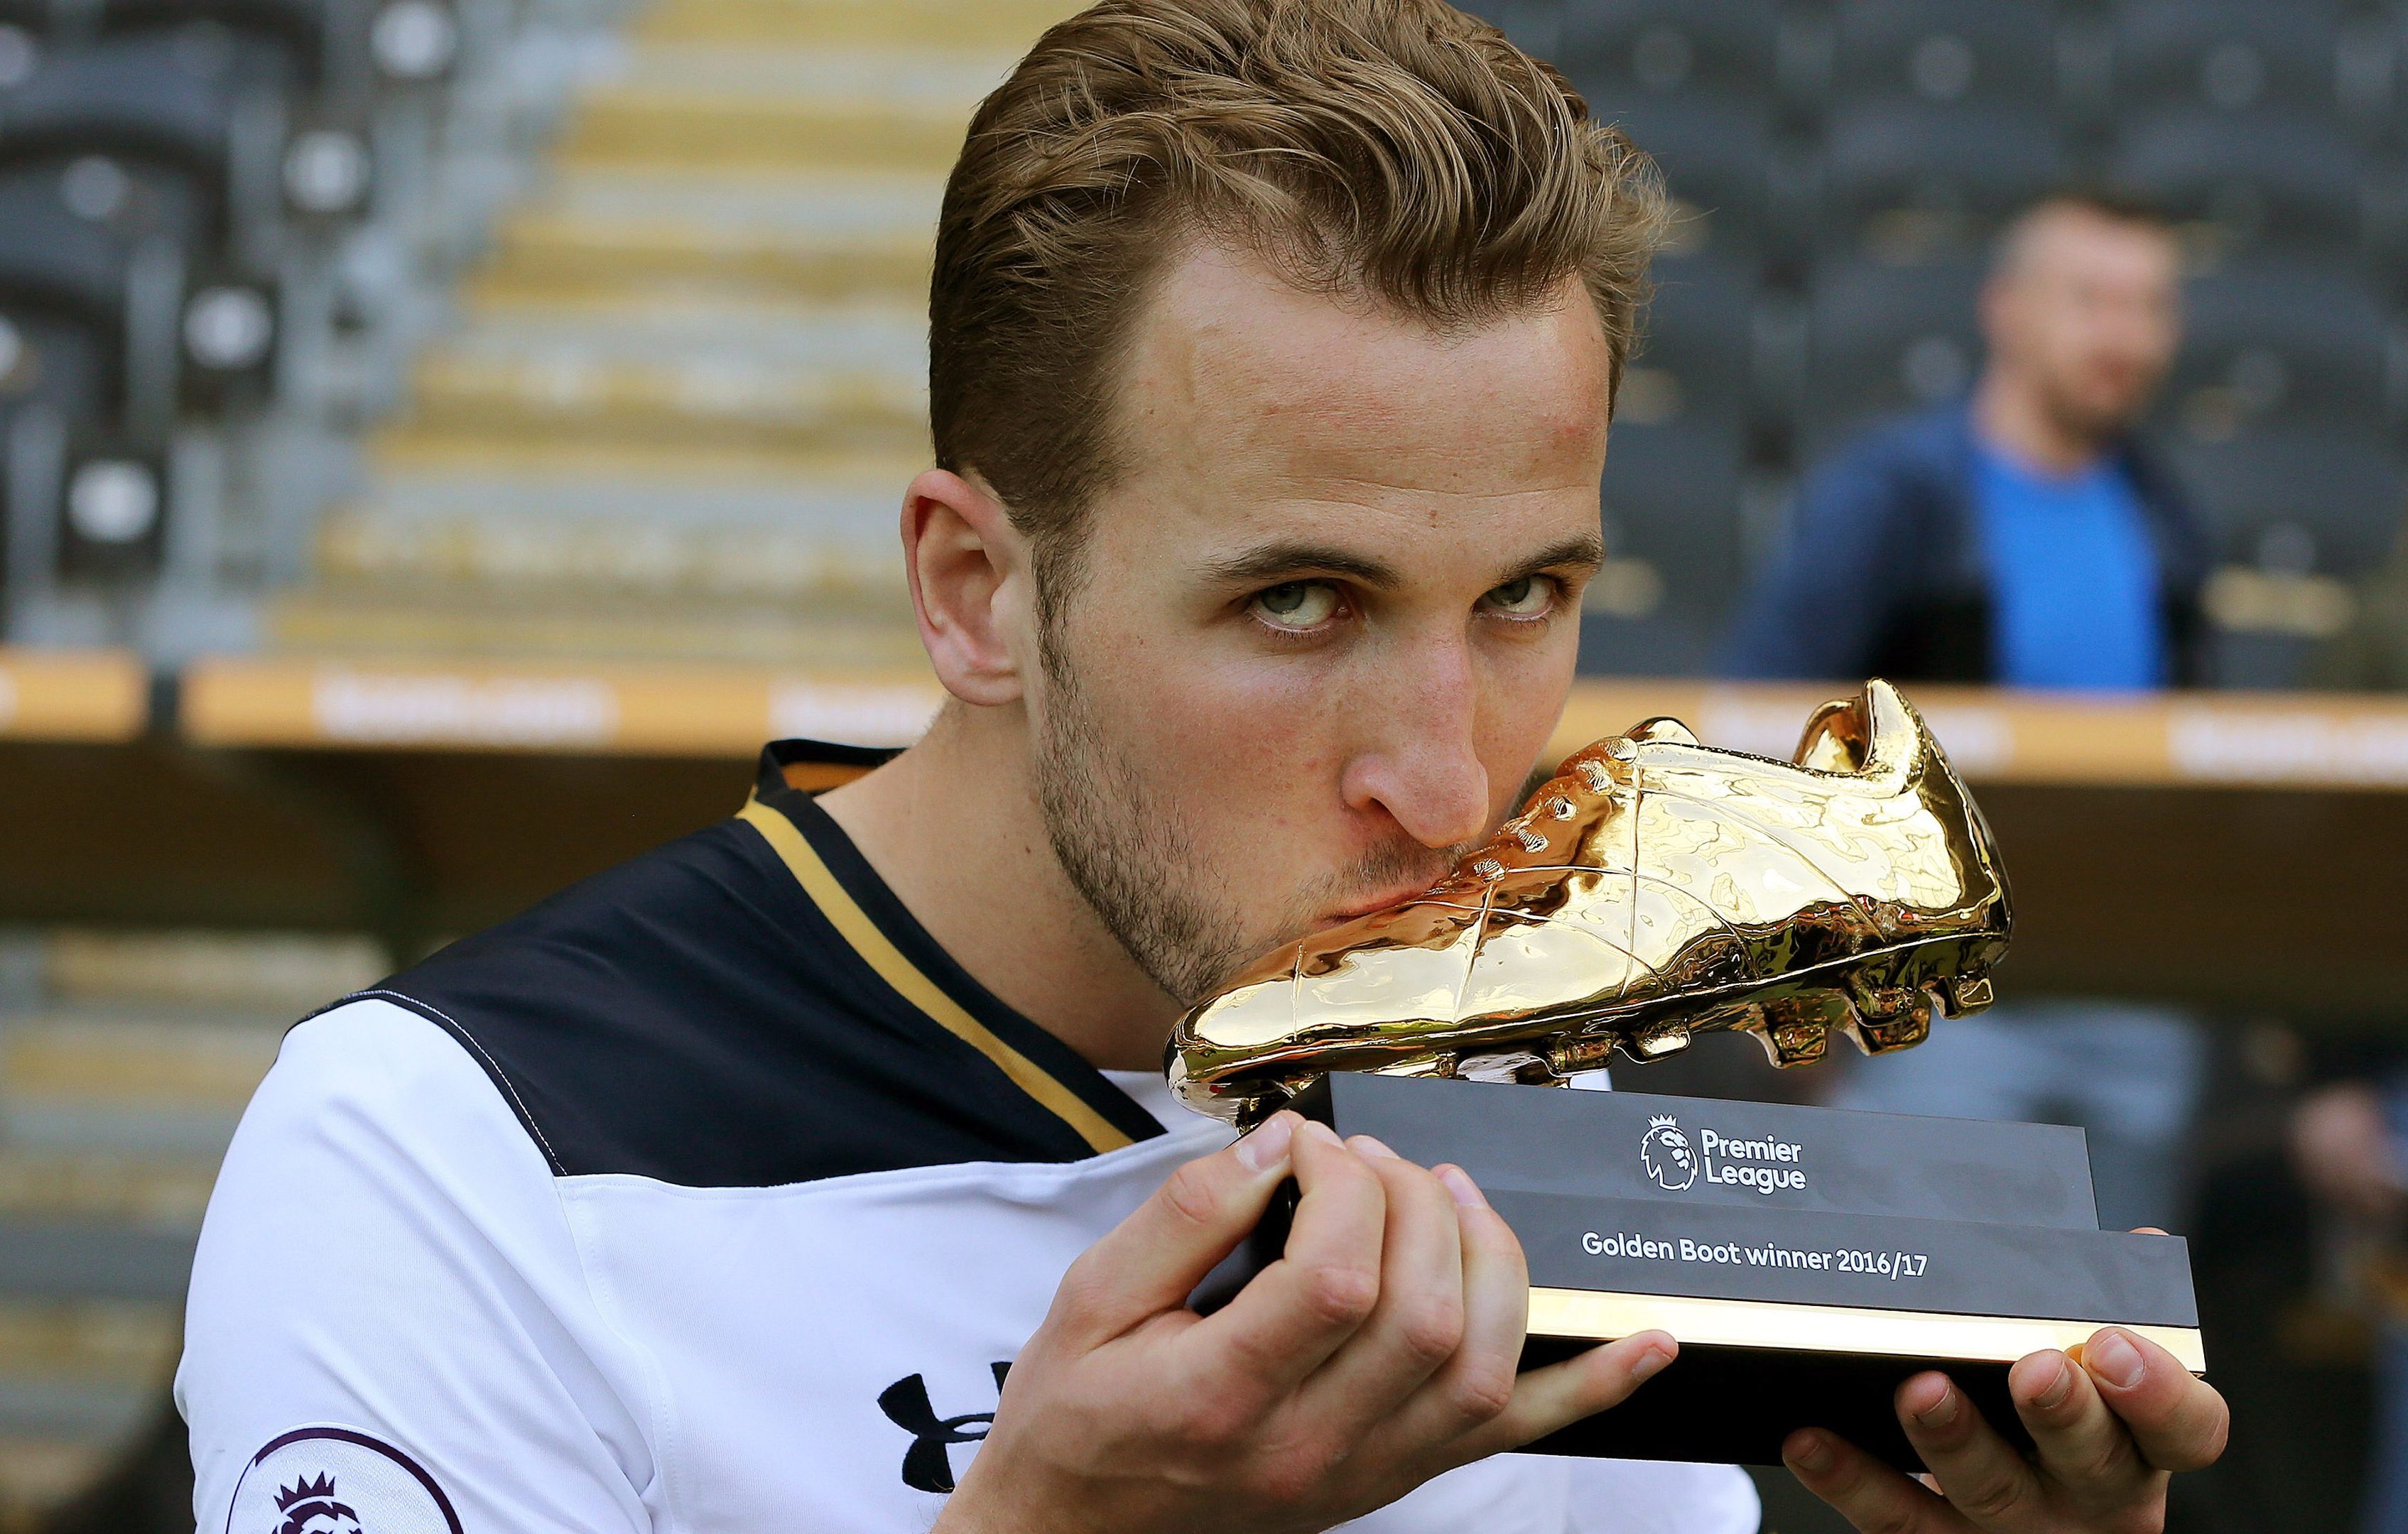 Harry Kane of Tottenham Hotspur with his Golden Boot award (Nigel Roddis/Getty Images)